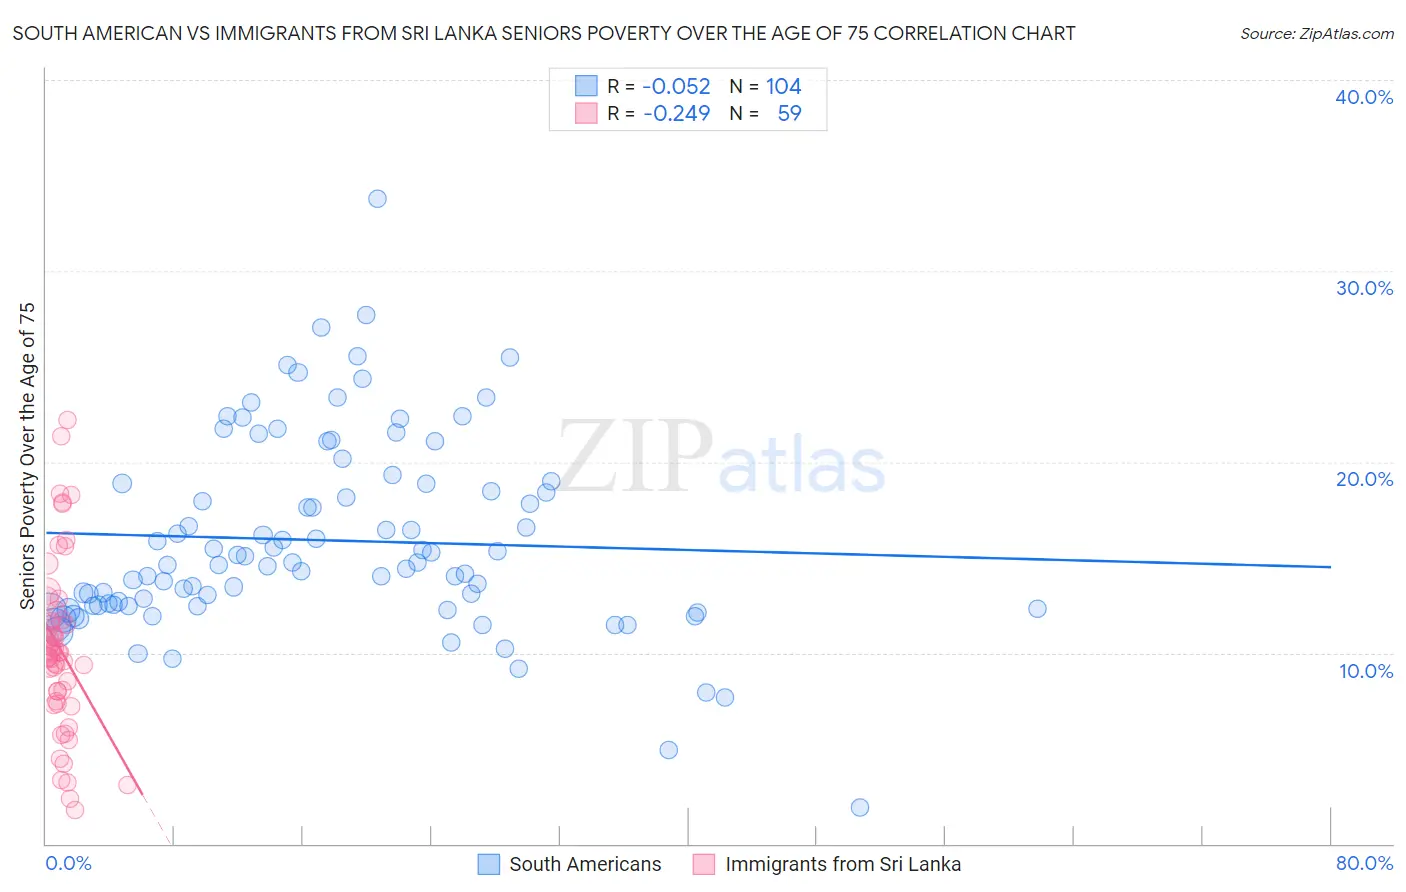 South American vs Immigrants from Sri Lanka Seniors Poverty Over the Age of 75